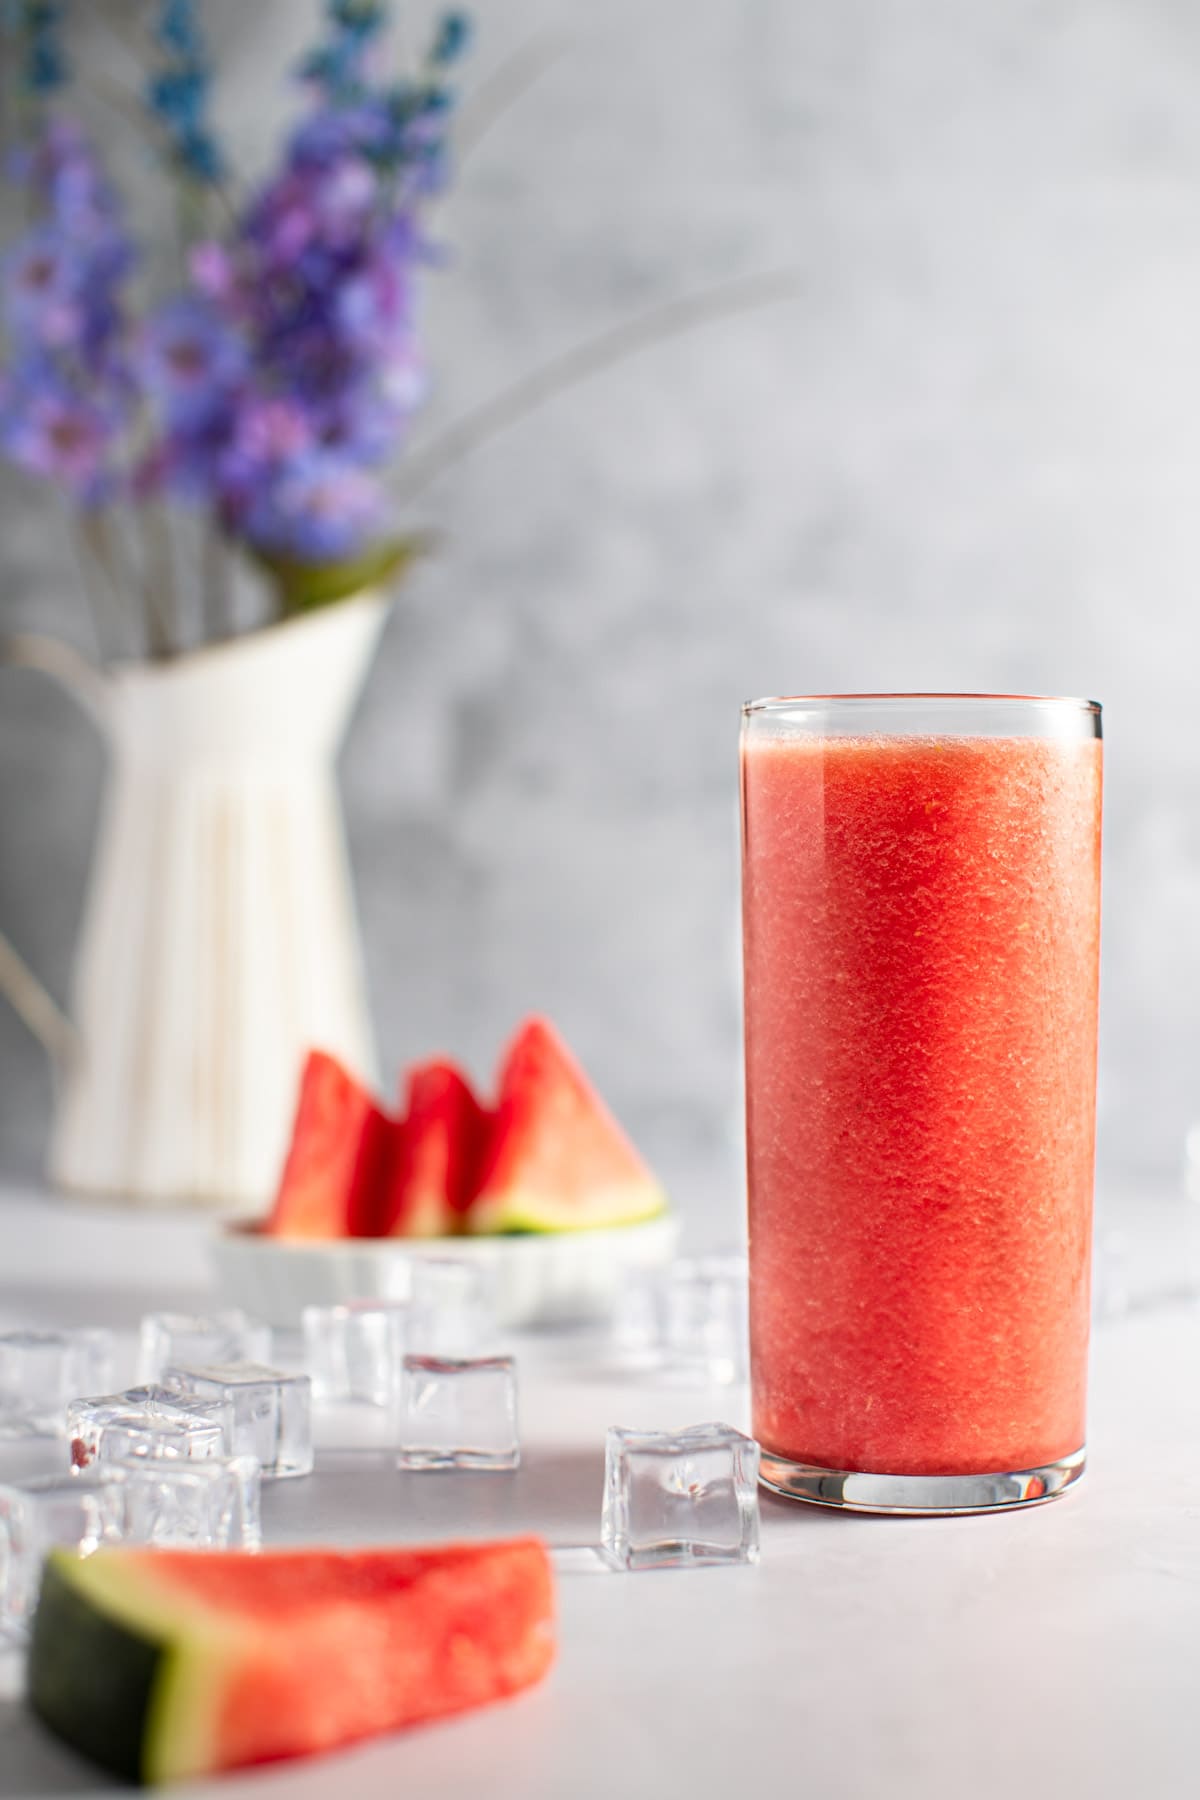 A tall glass of banana watermelon smoothie, next to ice cubes and slices of watermelon, with purple flowers in the background.